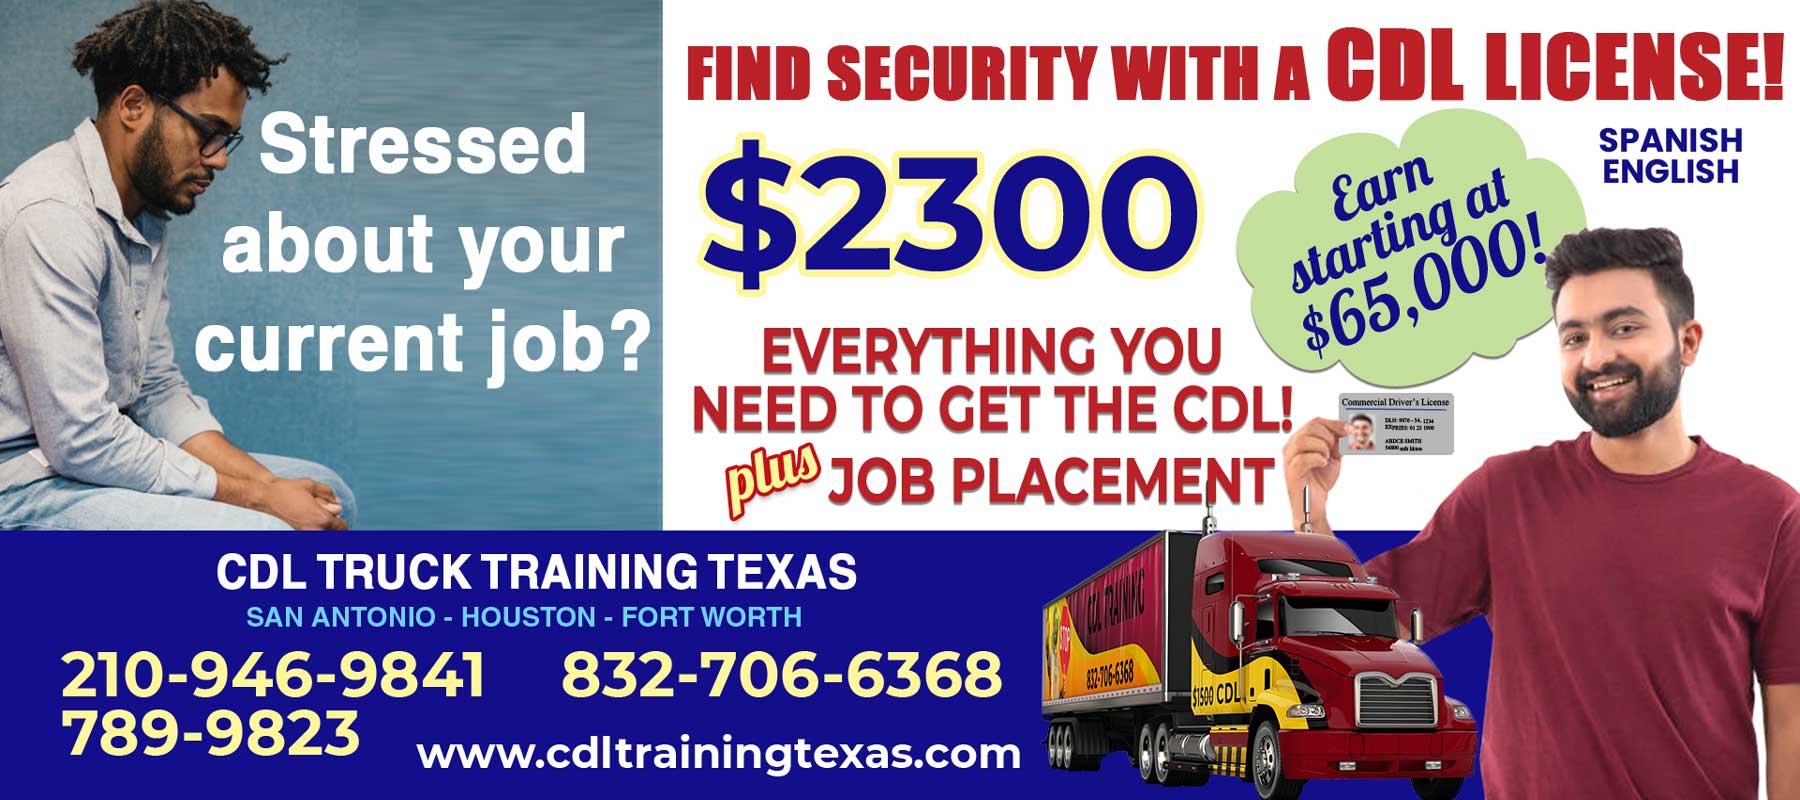 CDL training Texas, Quickly, Affordable $ 2300 CDL Training ...